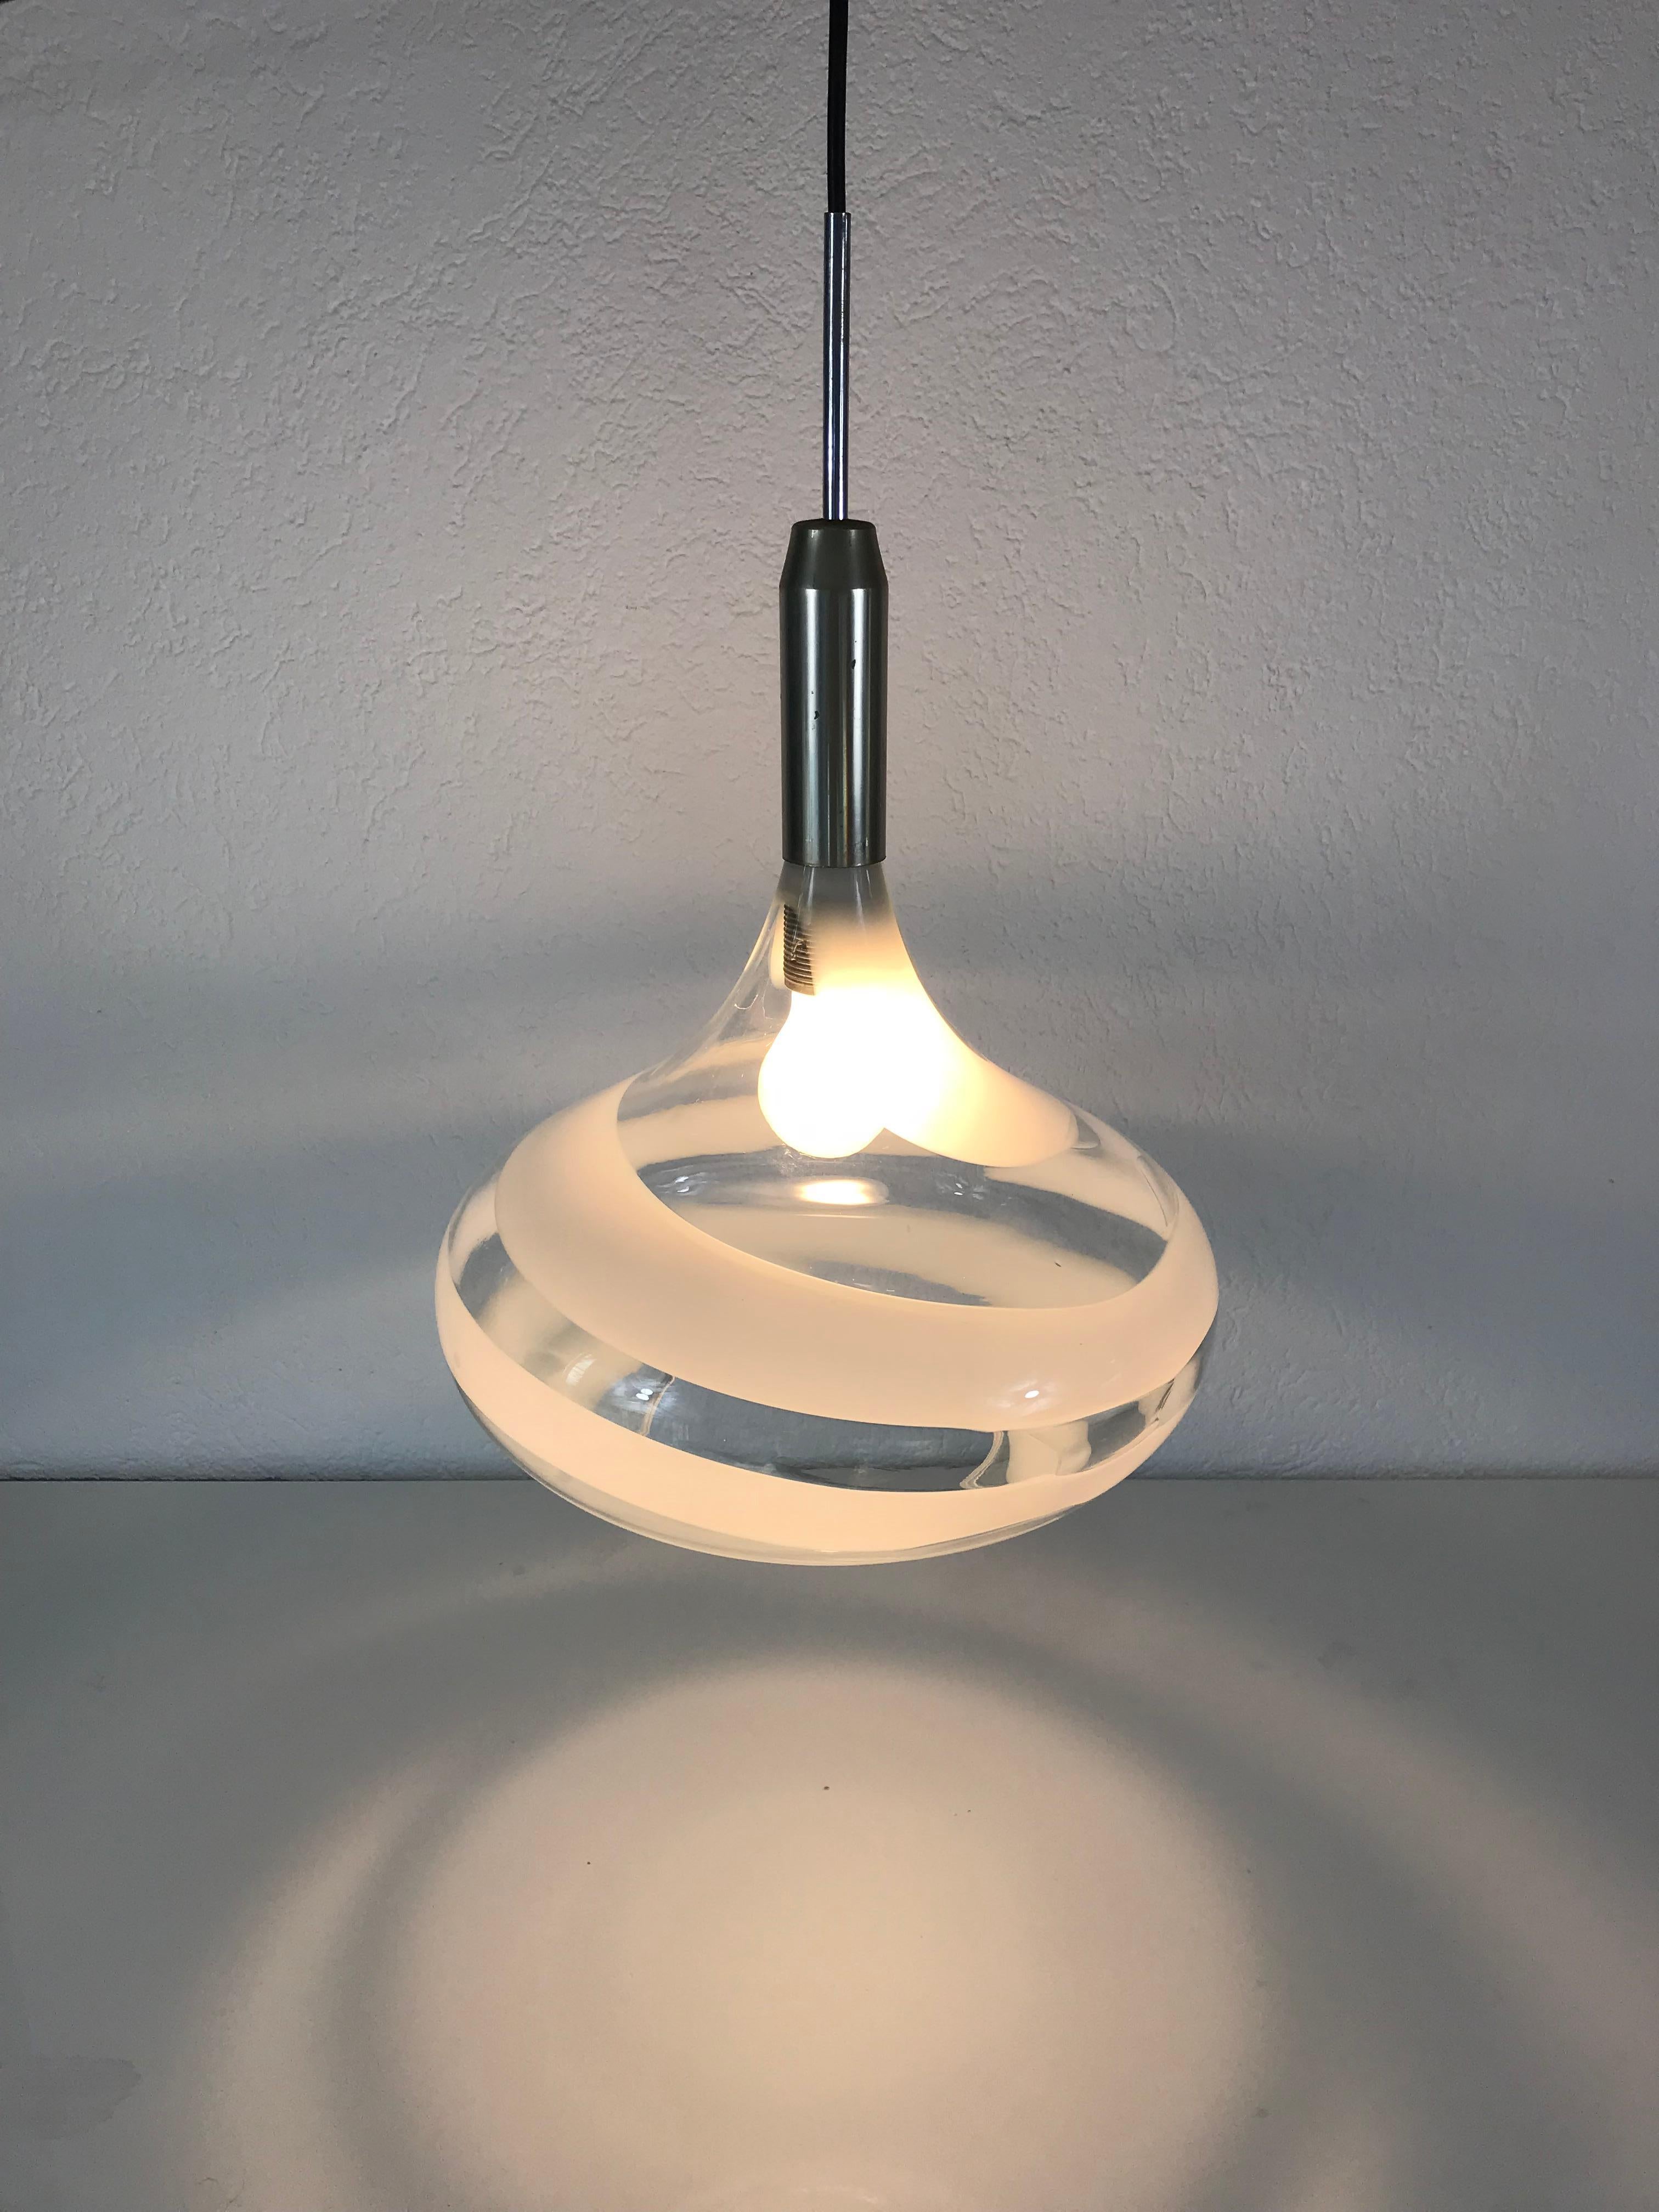 A Doria pendant lamp made in Germany in the 1970s. It is fascinating with its rare glass shape. The glass is transparent and has white spiral ornaments. The top of the light is polished metal.

The light requires one E27 light bulb.